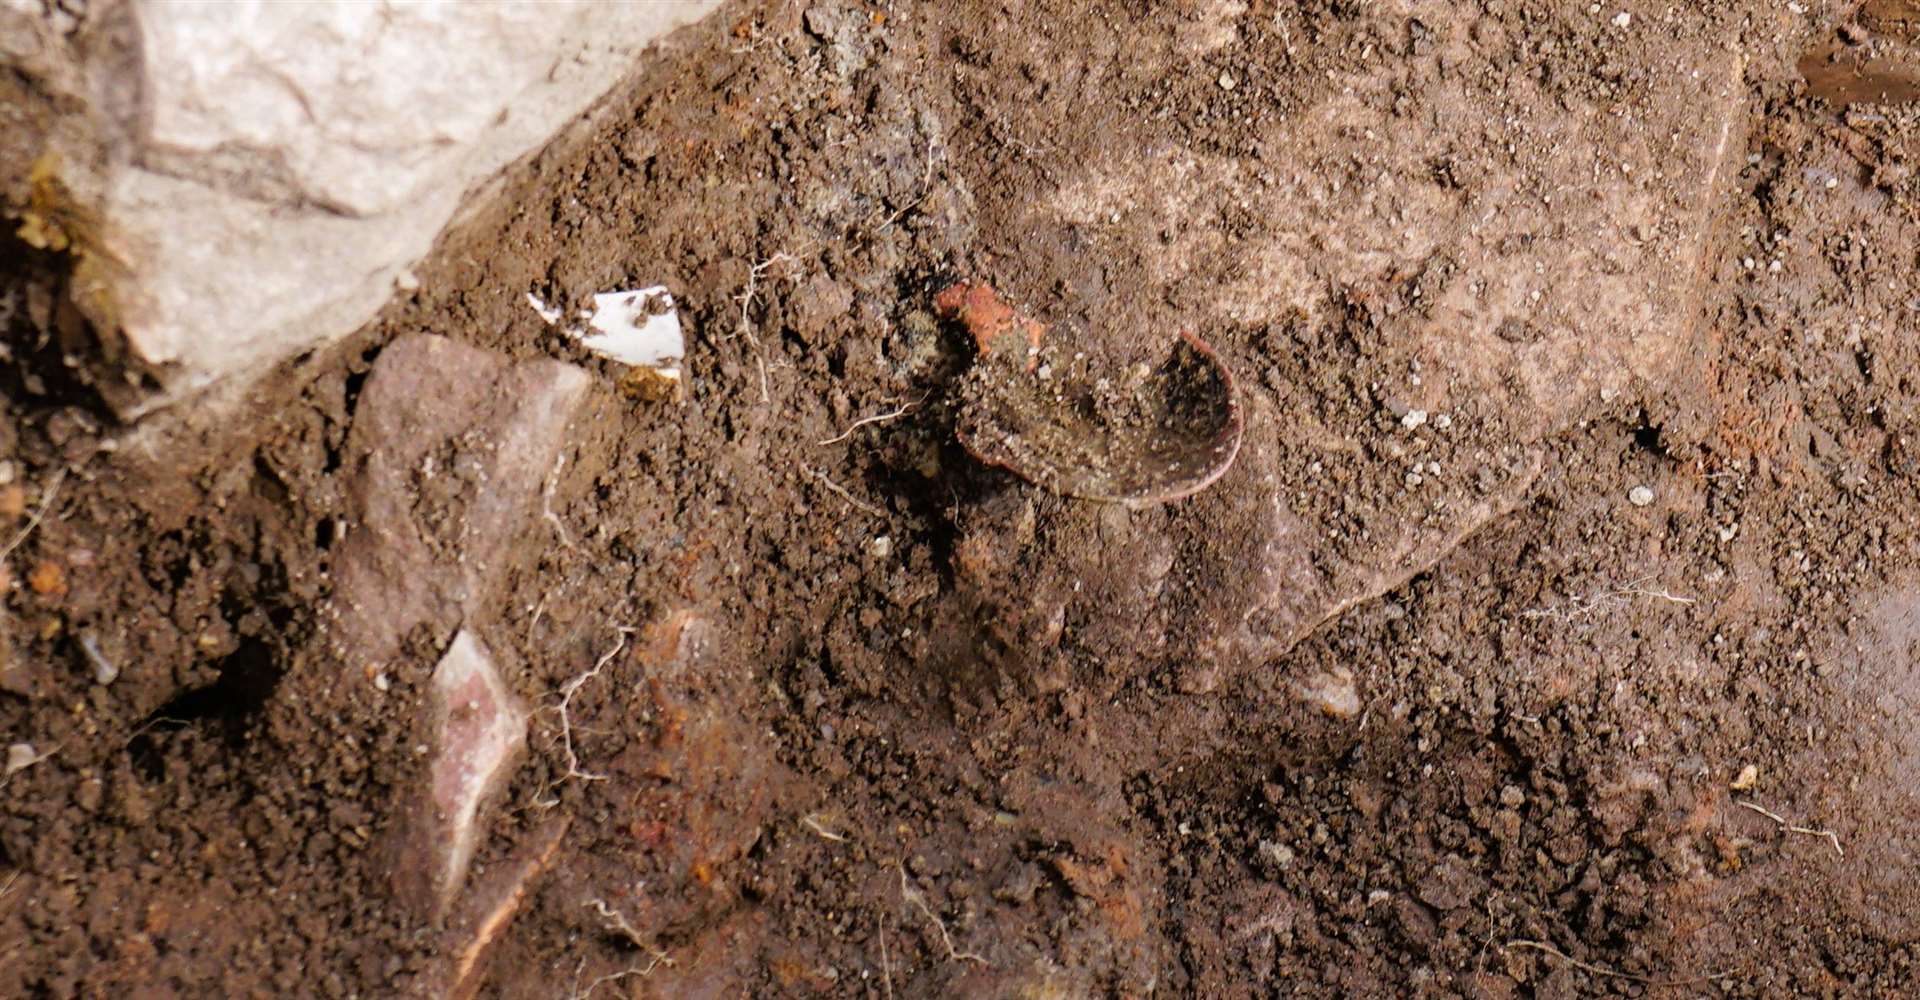 Part of a spoon can be seen at centre emerging from the soil. Picture: DGS